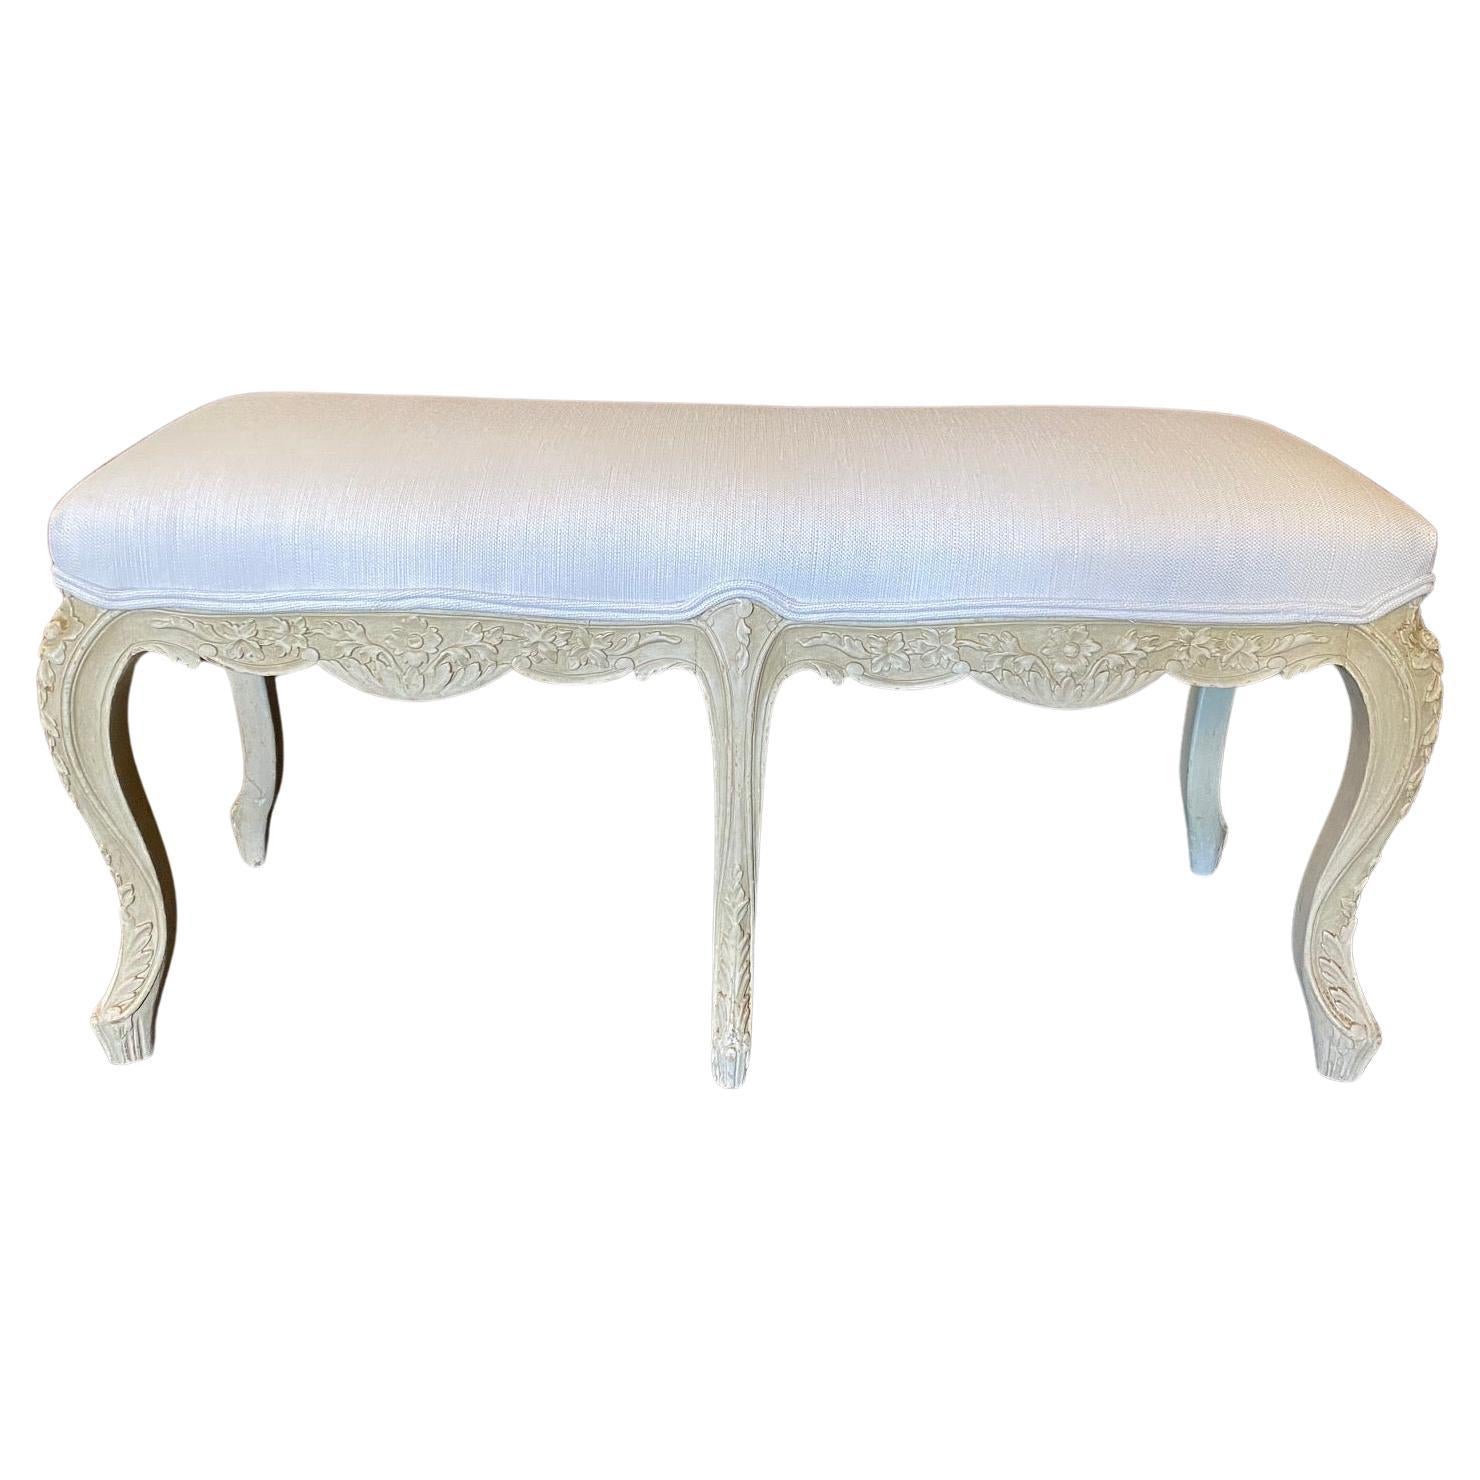  French 19th Century Carved Louis XV Bench or Window Seat with Original Paint For Sale